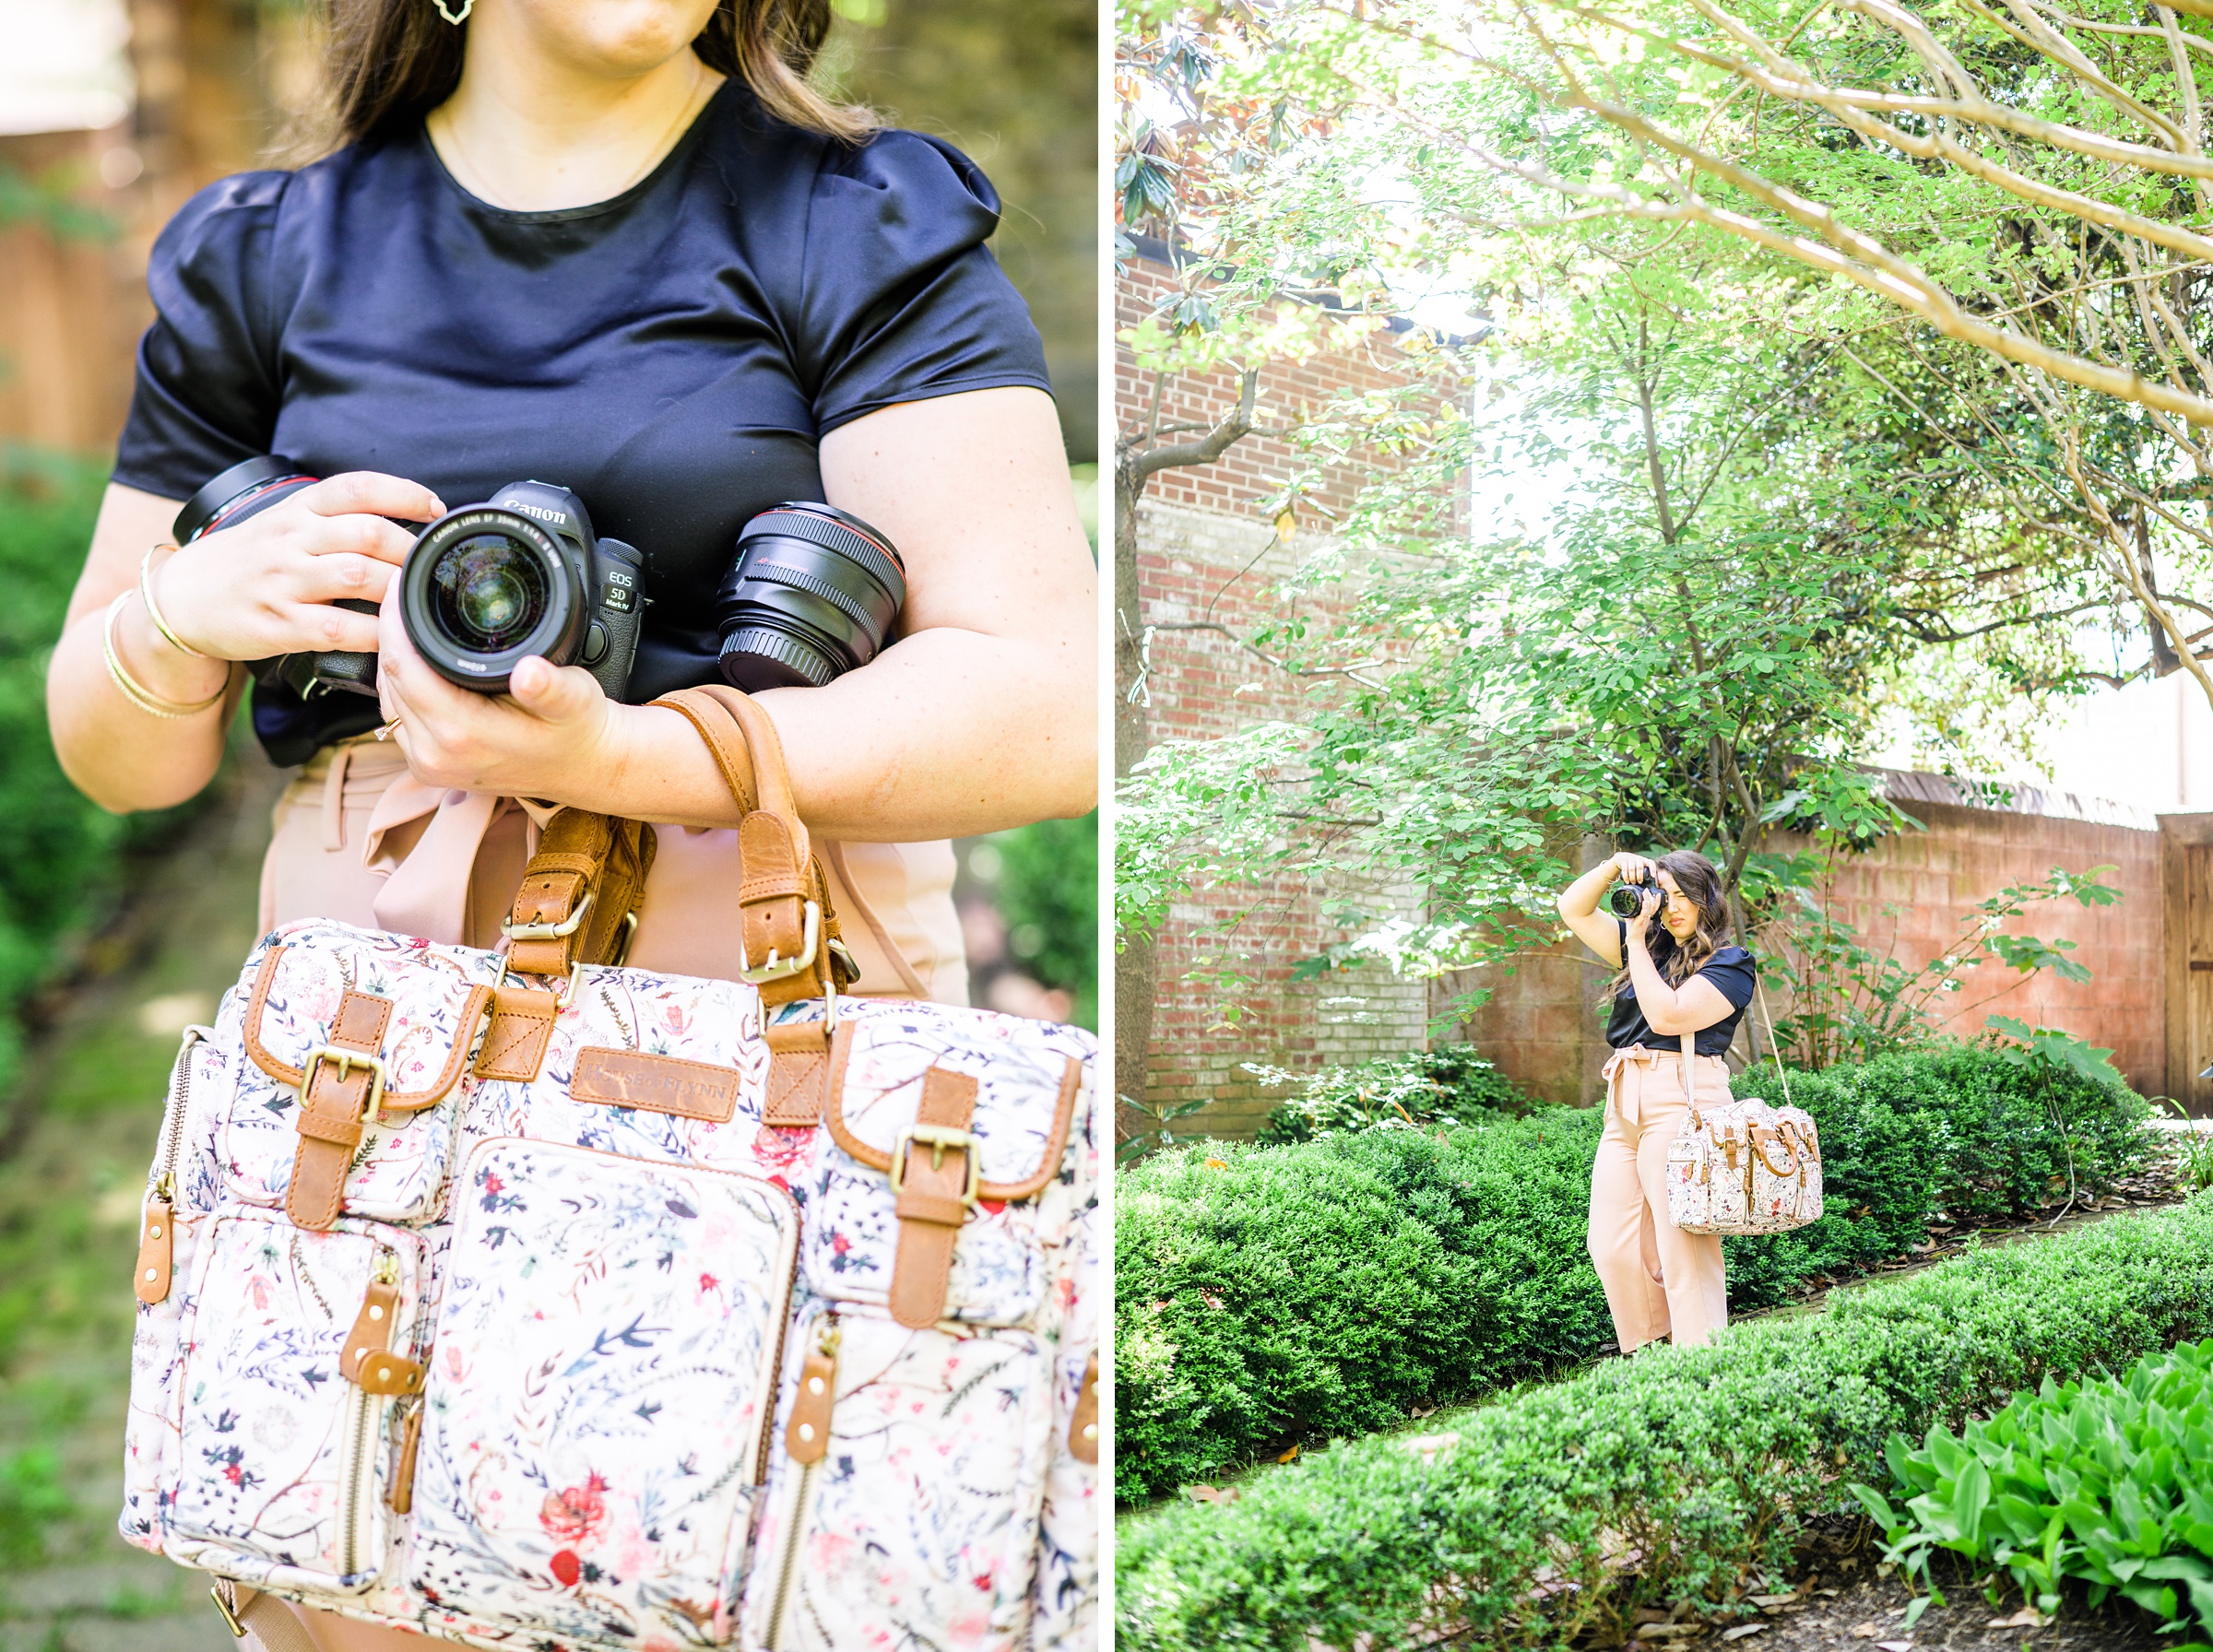 Emily Nicole Photography brand photography session in Old Town Alexandria photographed by Maryland Brand Photographer Cait Kramer